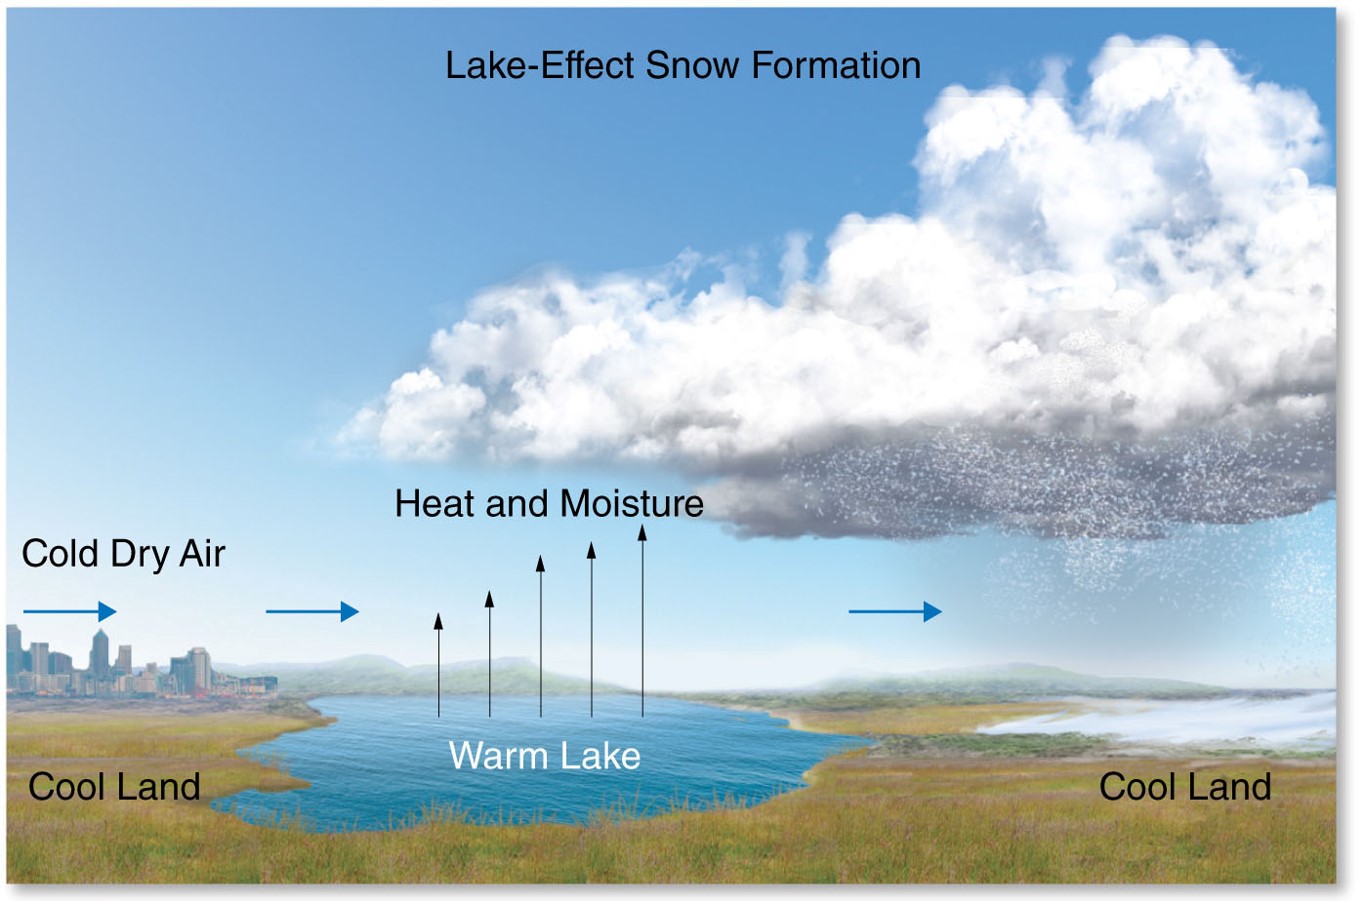 Figure shows the mechanisms of lake effect snow. Cold air moves across warm water and evaporation increases water vapor content in the air. Once the now warmer, wetter air reaches the cold ground on the other side of the lake, heavy snow is produced.